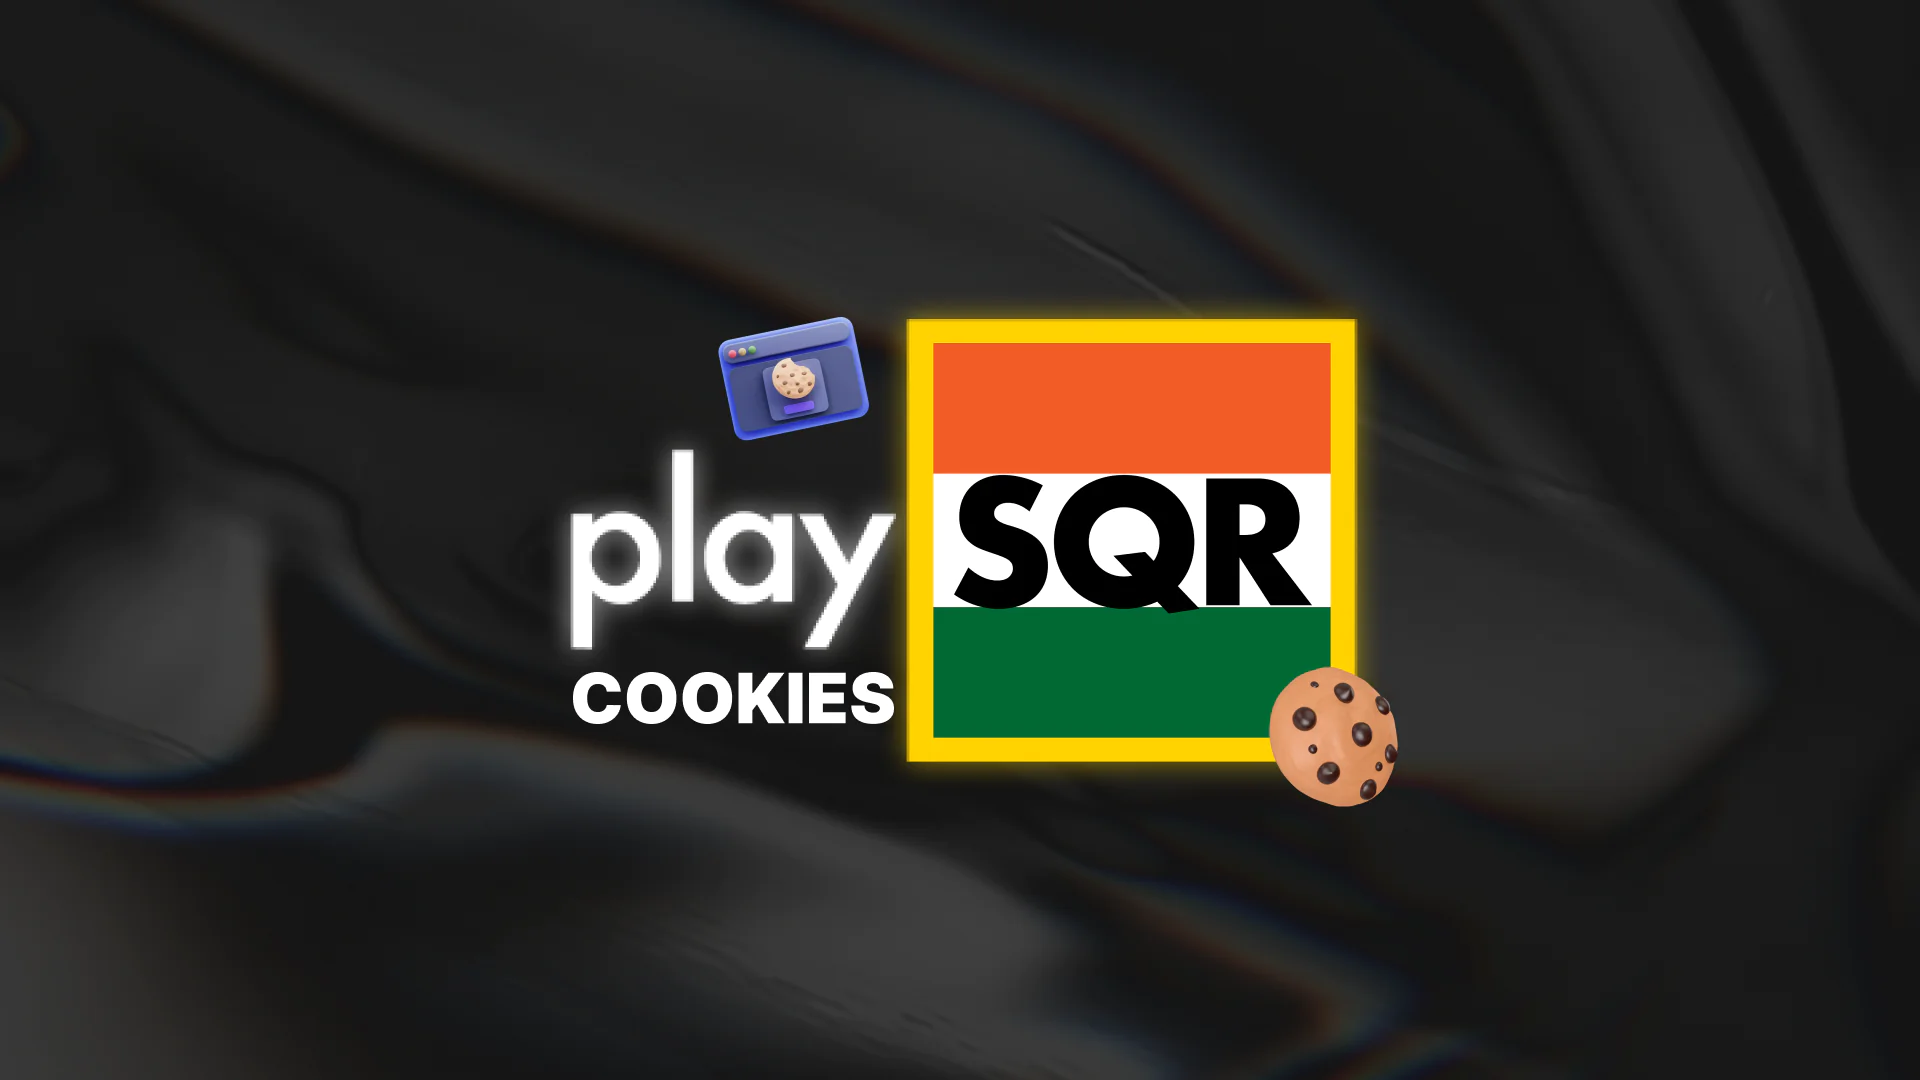 Learn more Information about PlaySQR Cookie Policy